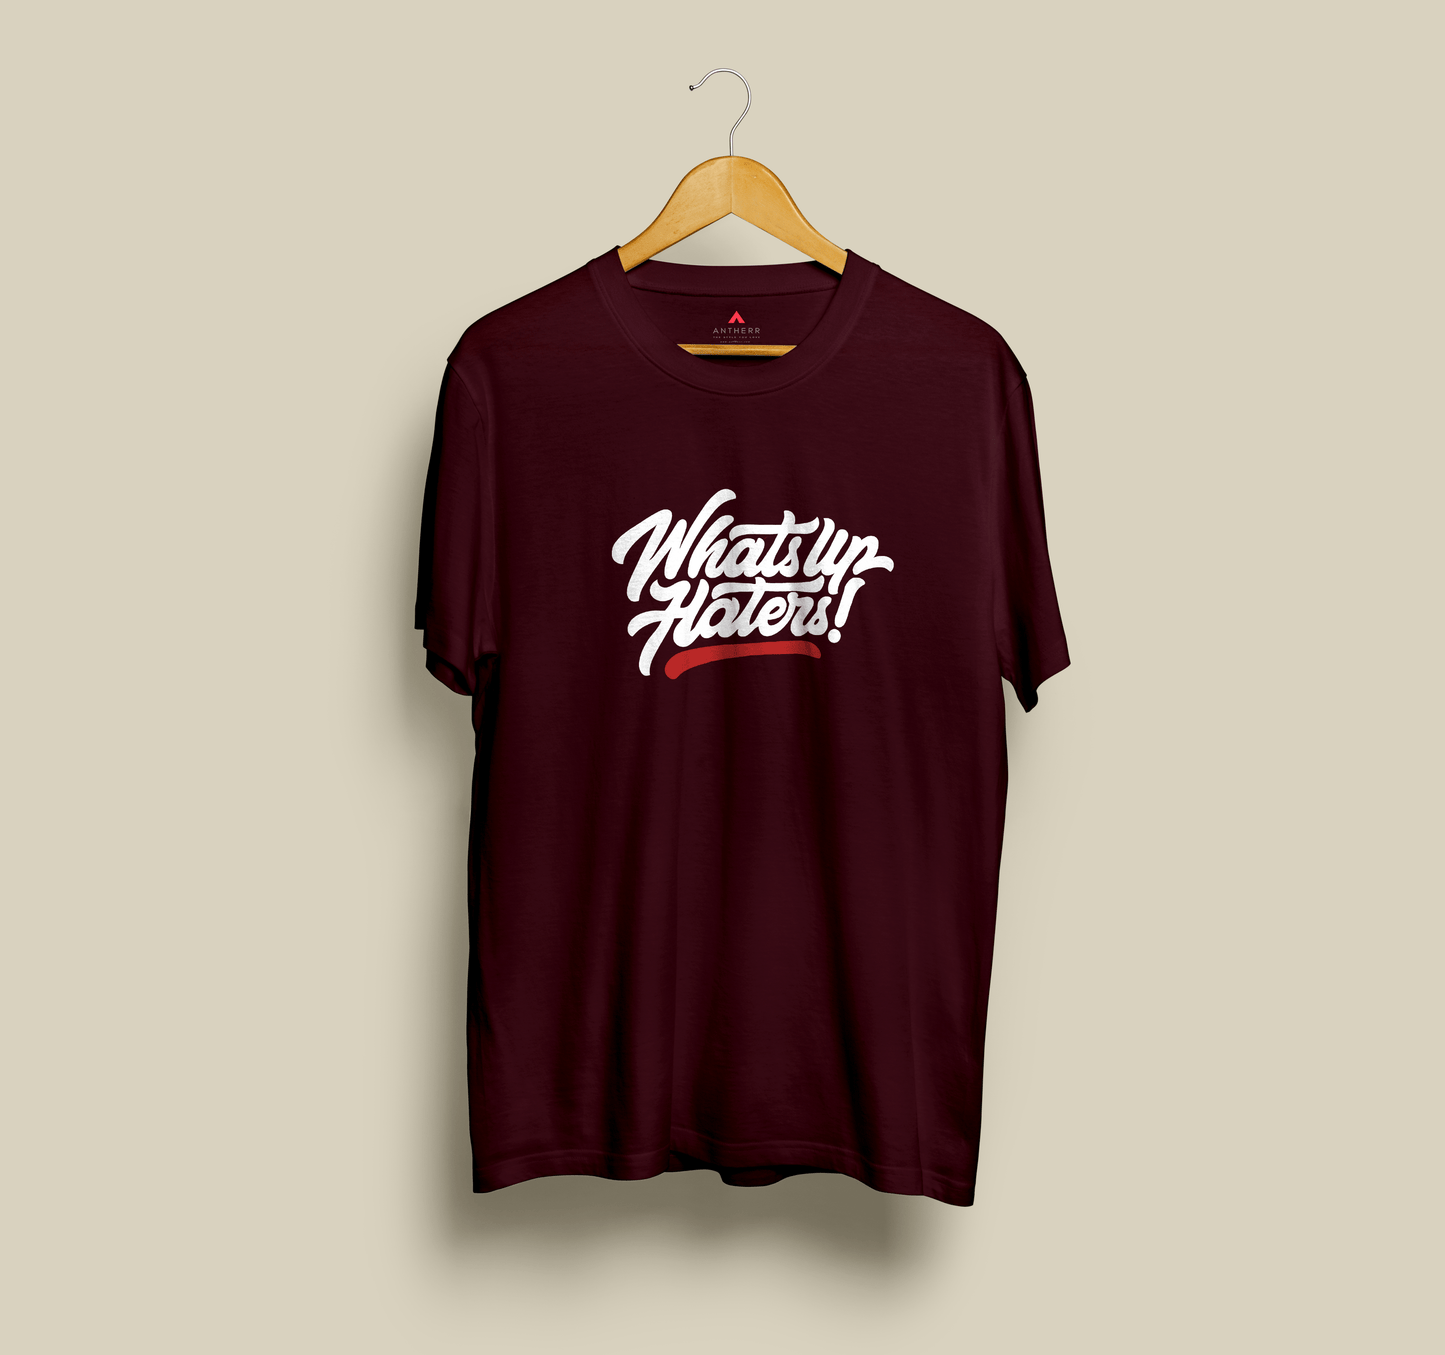 " WHAT'S UP HATERS " - UNISEX HALF-SLEEVE T-SHIRTS MAROON